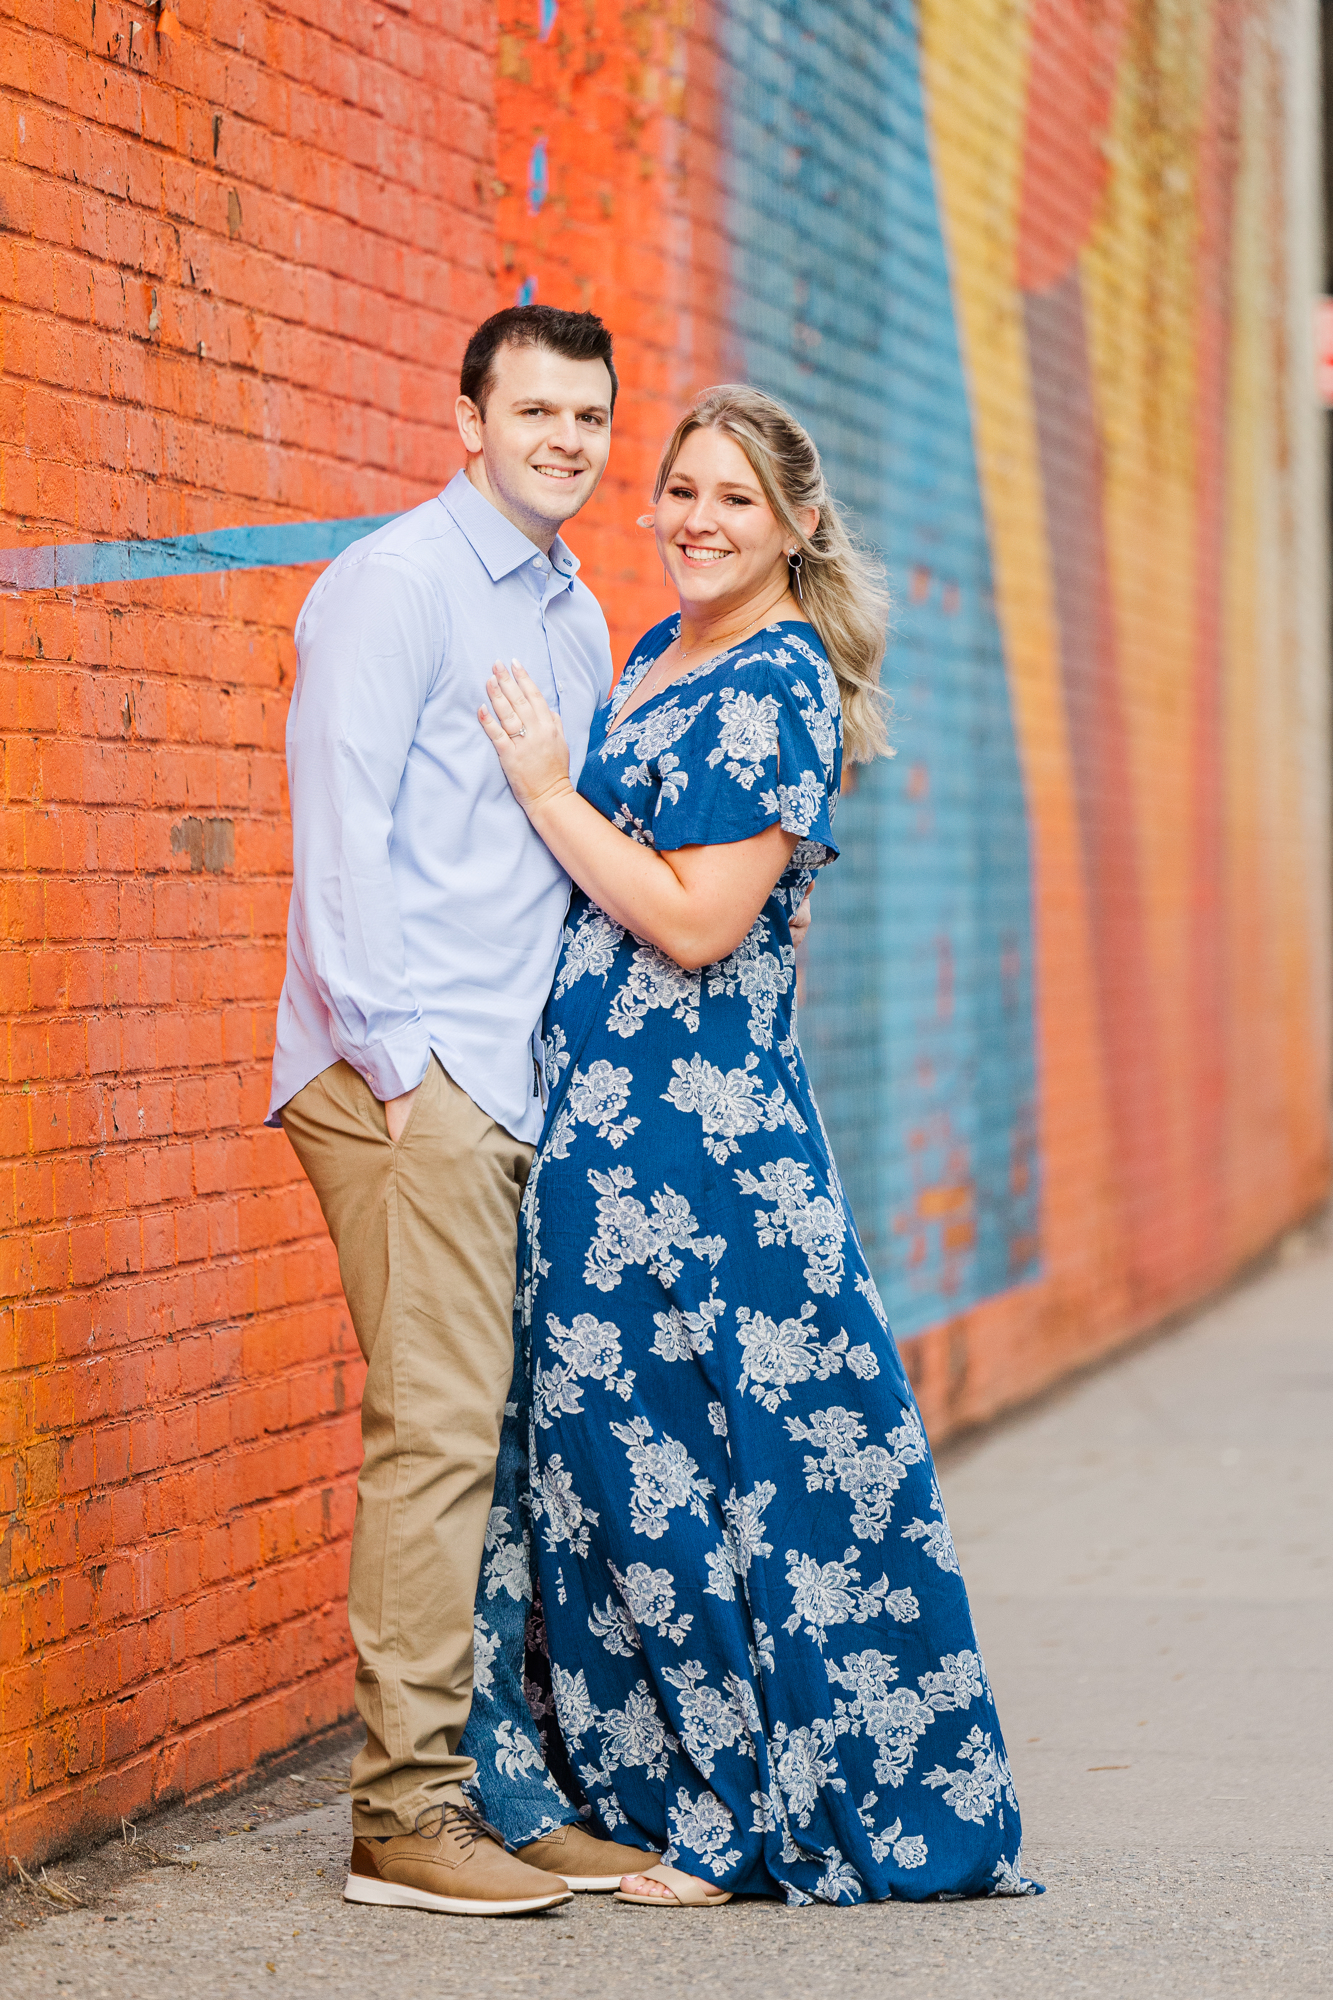 Terrific Engagement Pictures in DUMBO